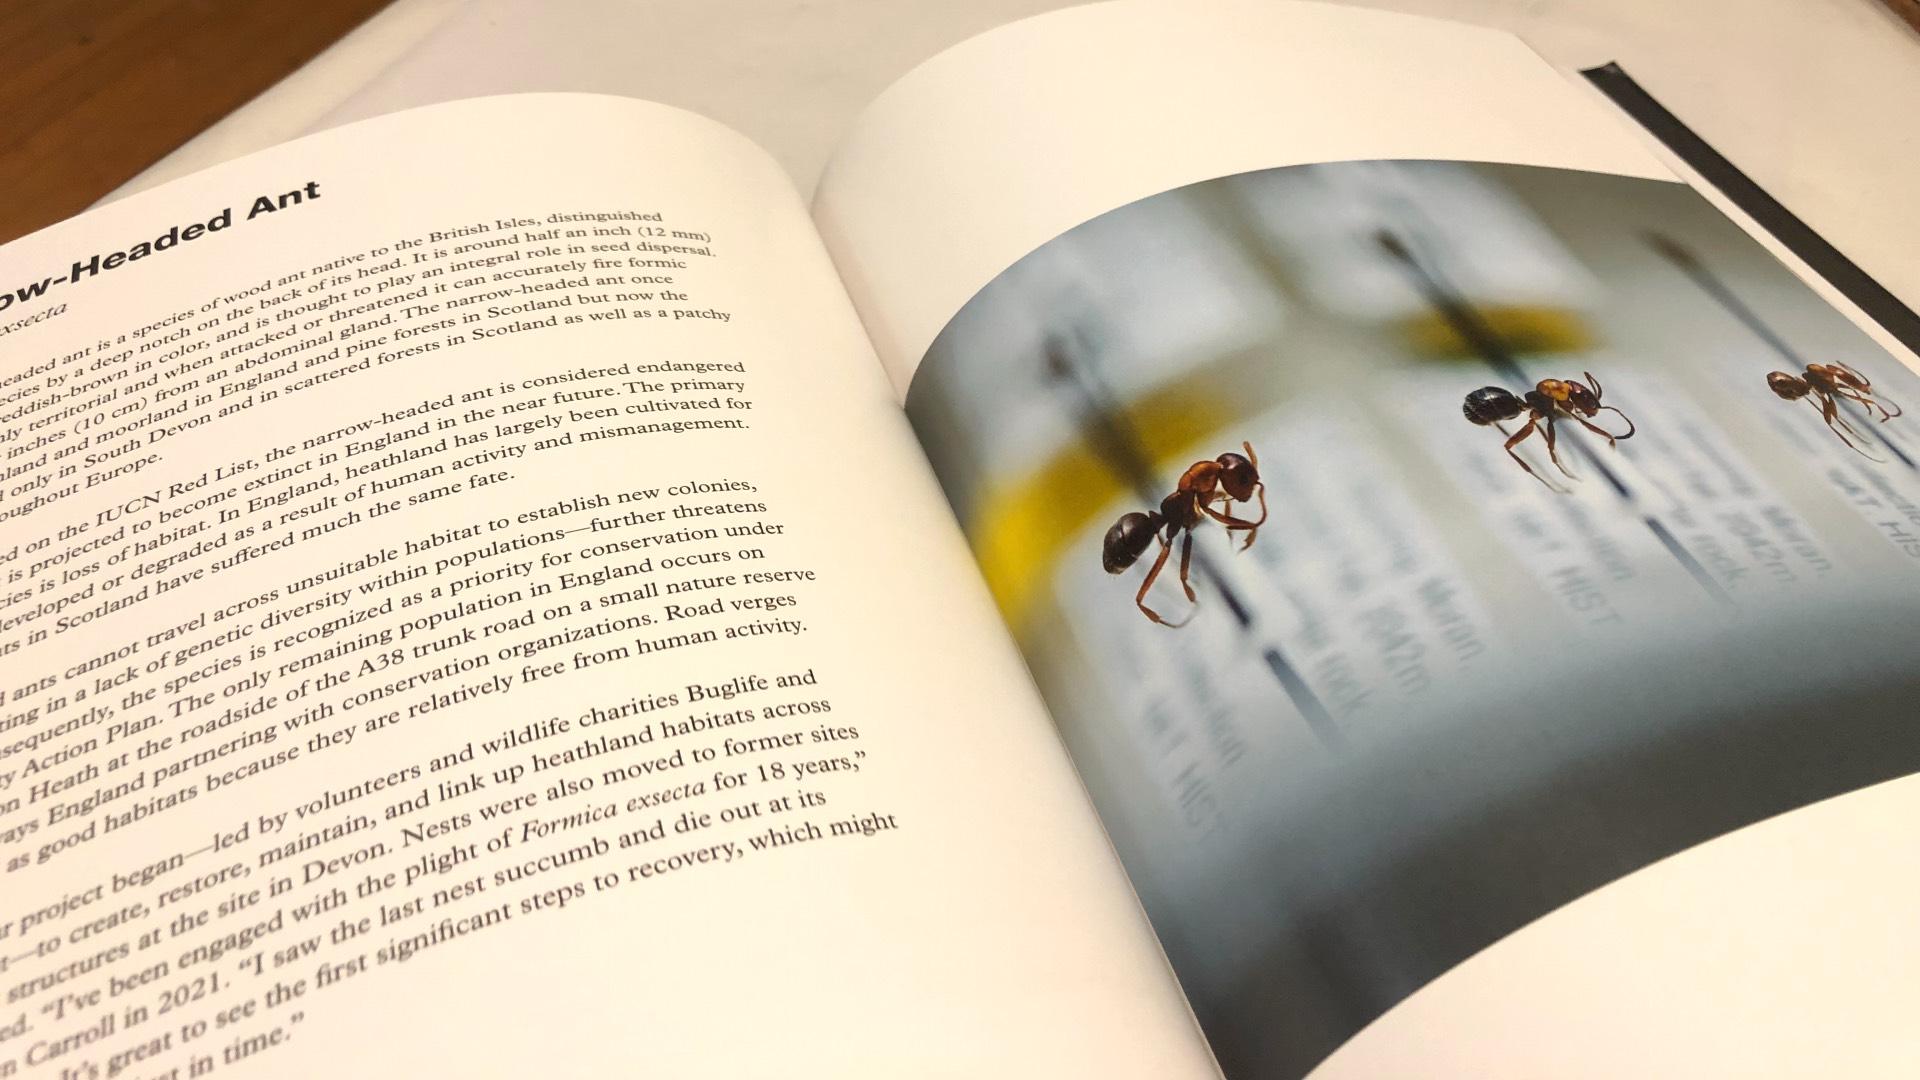 The narrow-headed ant is among the endangered species featured in "Extinction." The book's goal is to raise awareness and spur conservation efforts. (Patty Wetli / WTTW News)